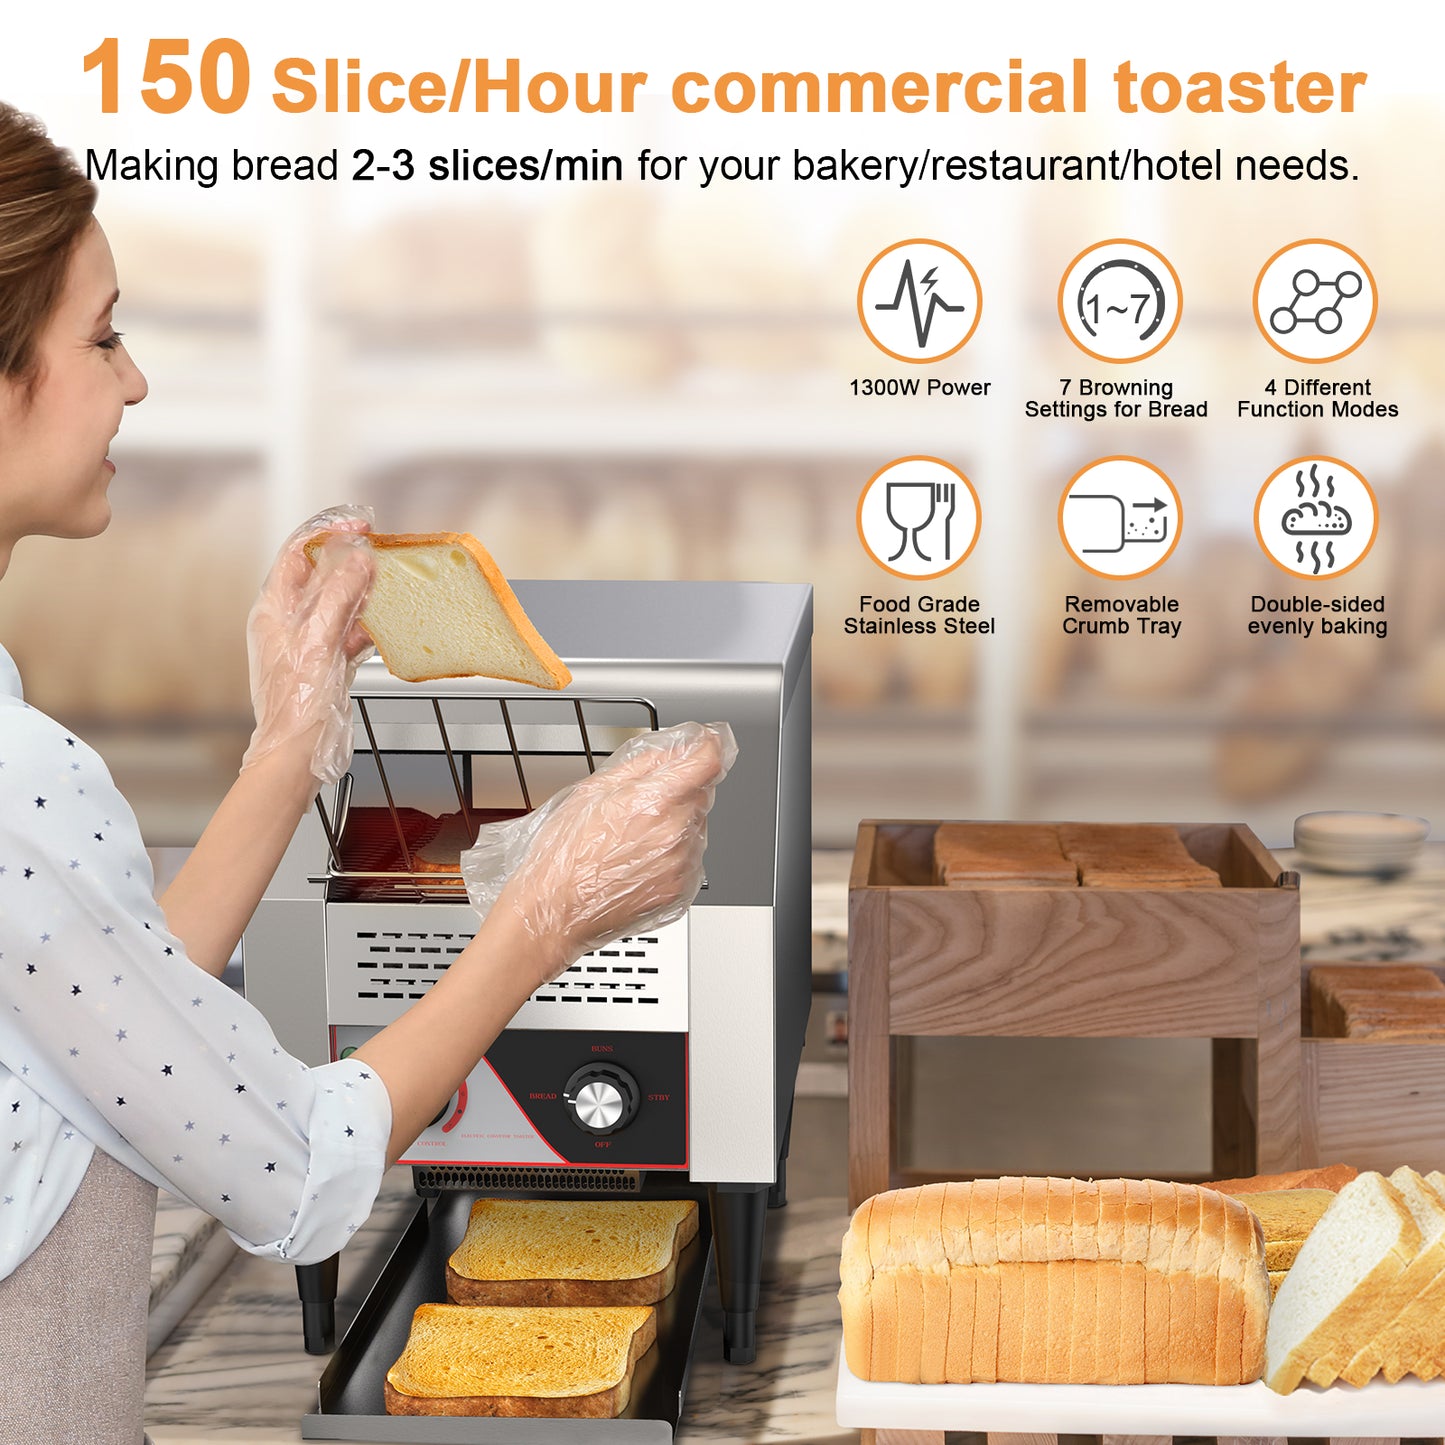 150PCS/H Electric Commercial Conveyor Toaster Tray Toasting Machine Restaurant